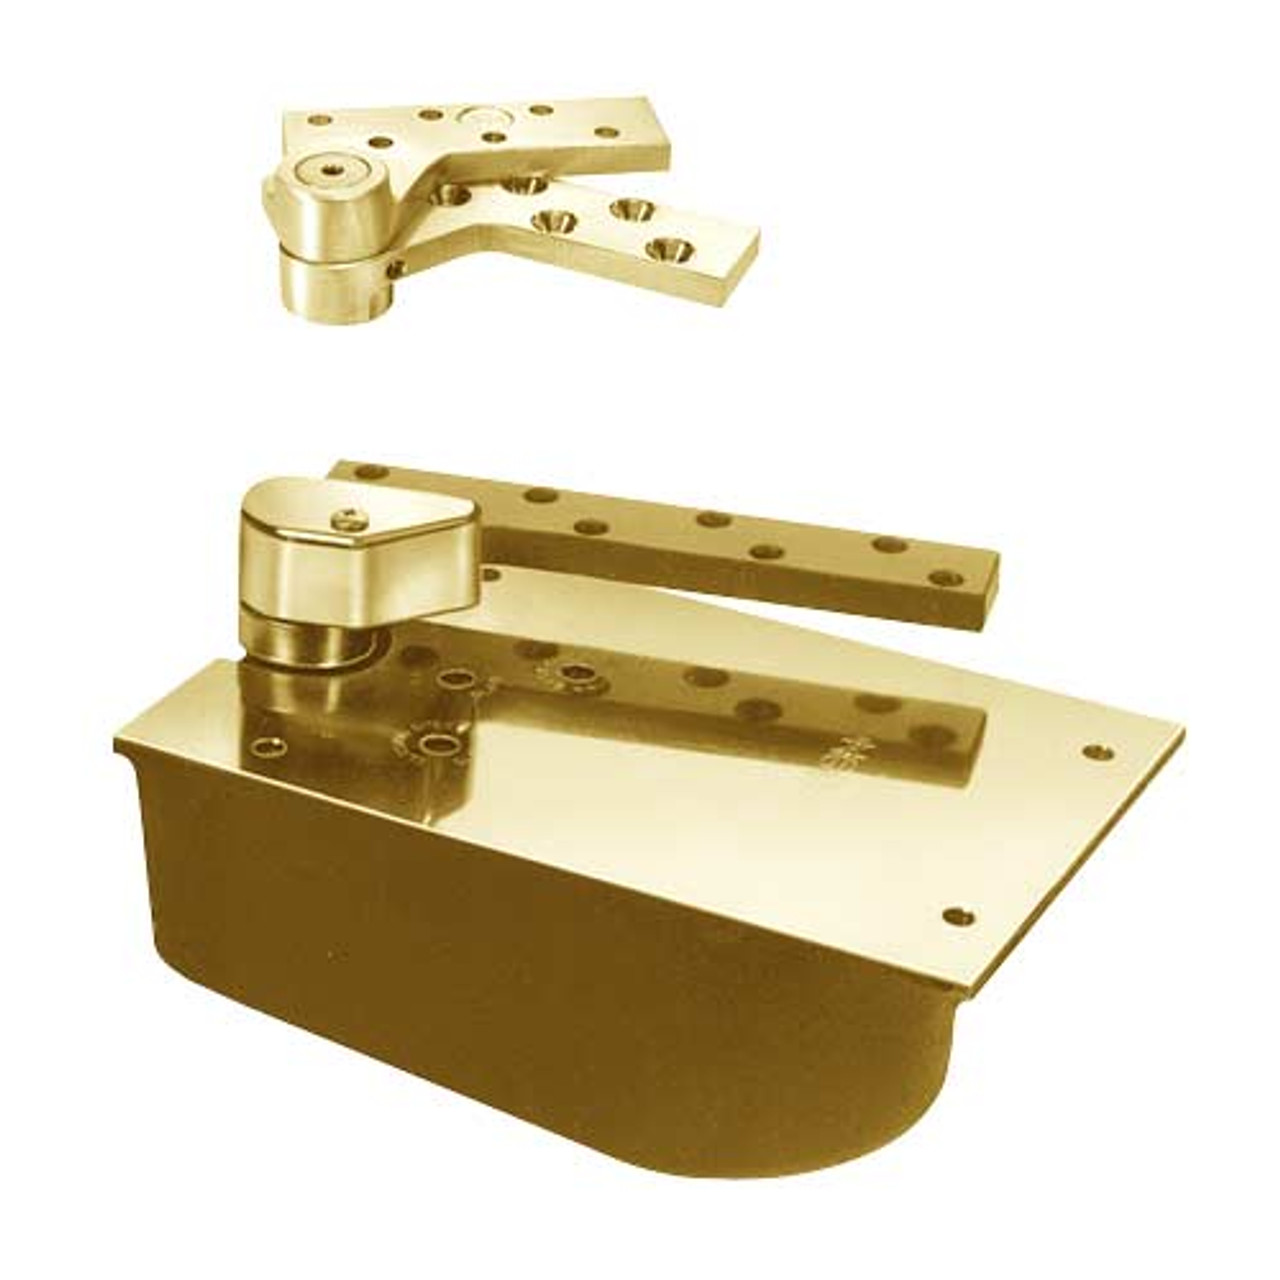 L27-105N-RH-1-3/4-605 Rixson 27 Series Extra Heavy Duty Lead Lined Offset Floor Closer in Bright Brass Finish